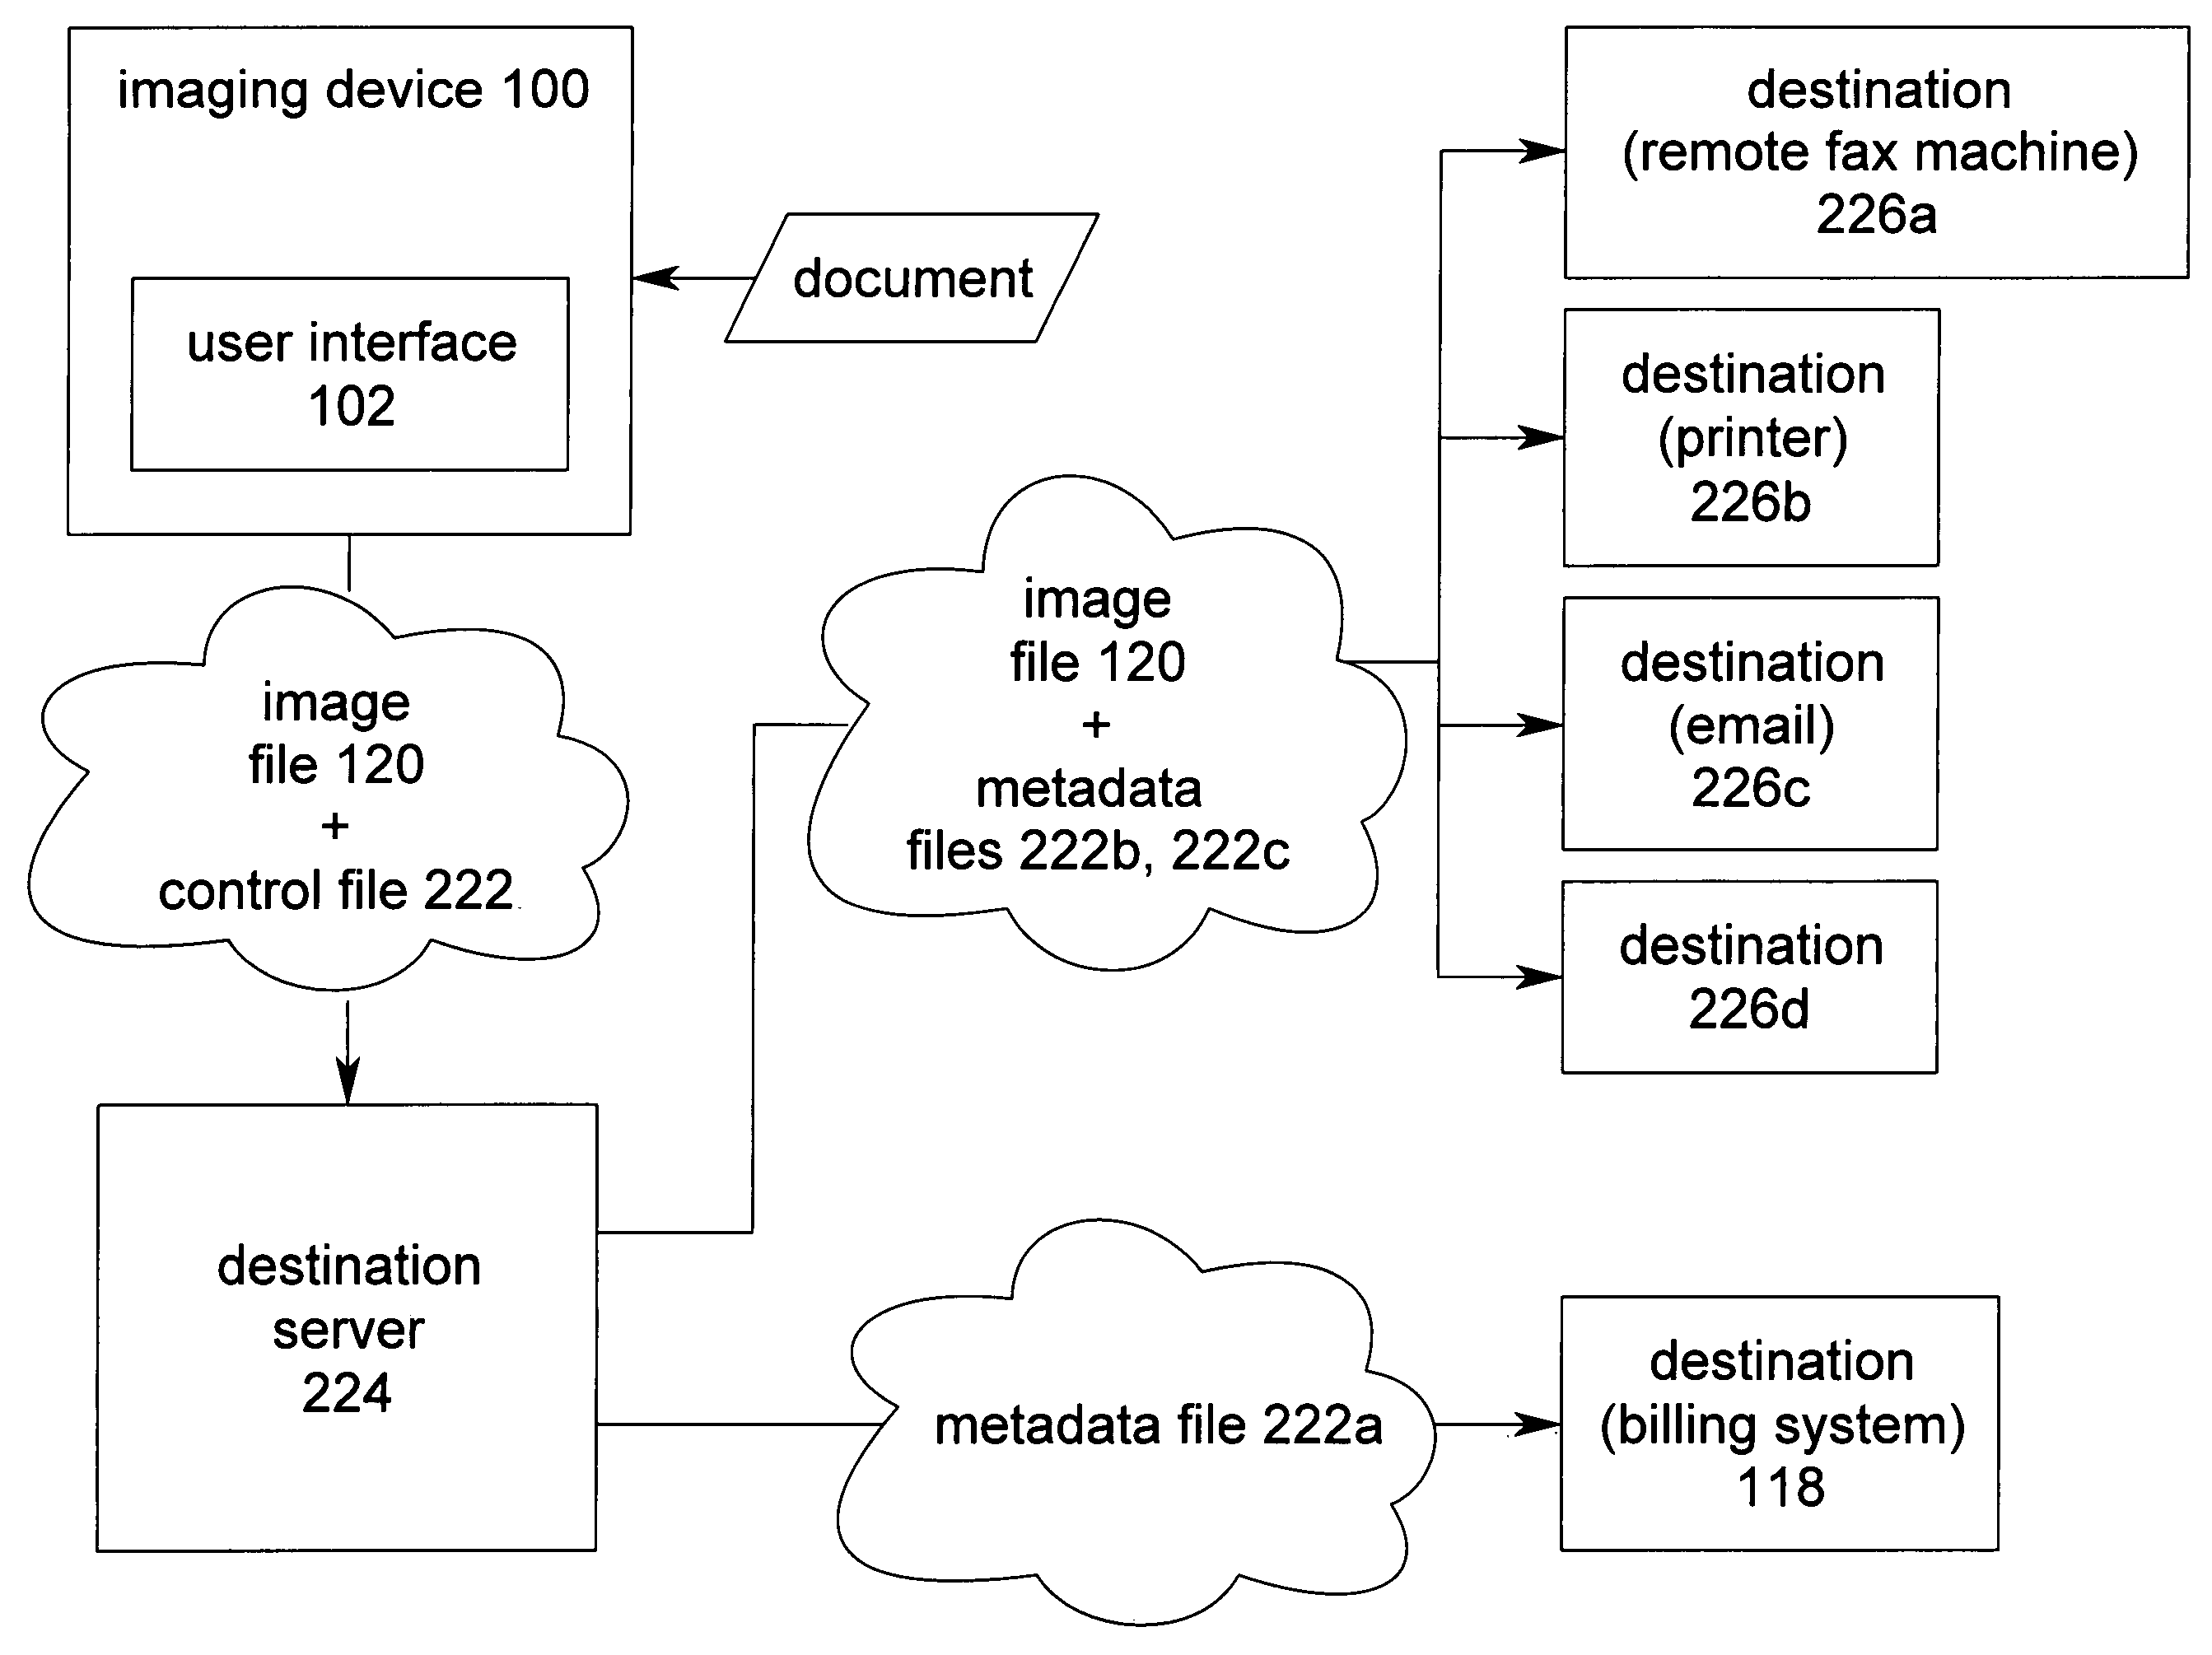 Generating passive metadata from user interface selections at an imaging device